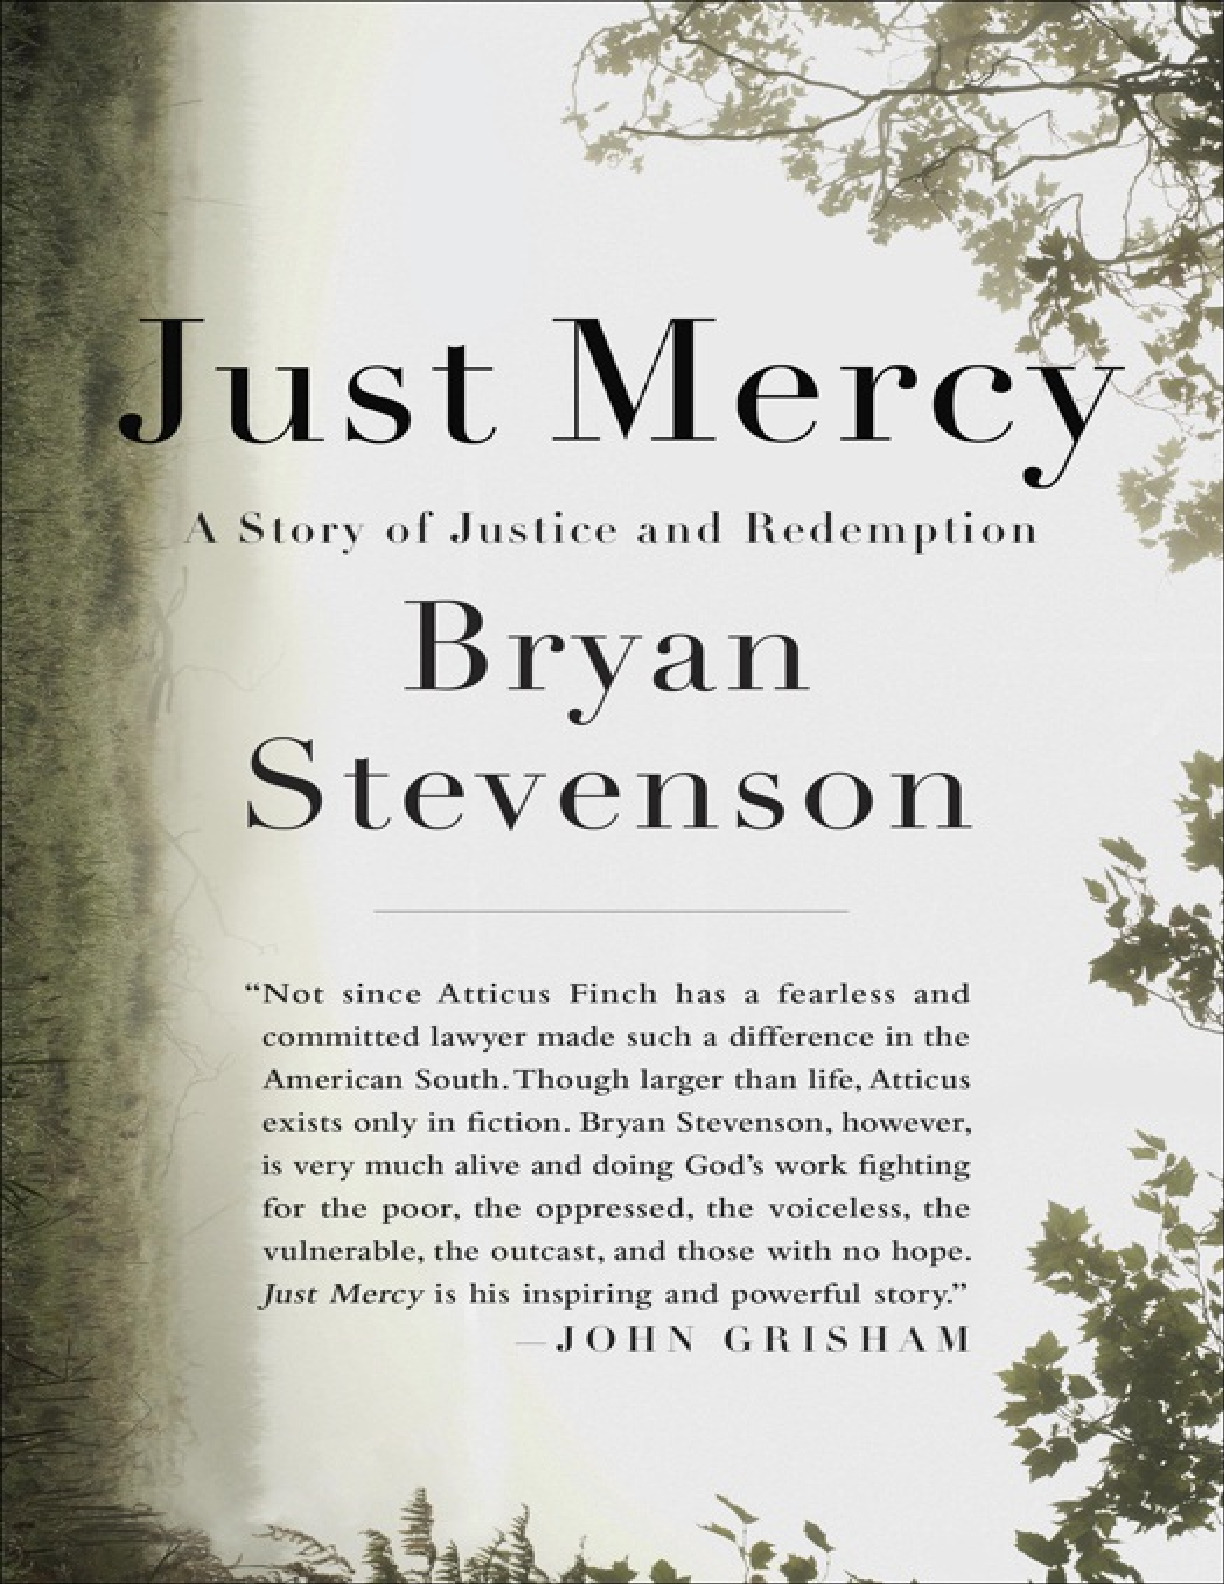 Just Mercy_ A story of Justice and Redemption ( PDFDrive.com )